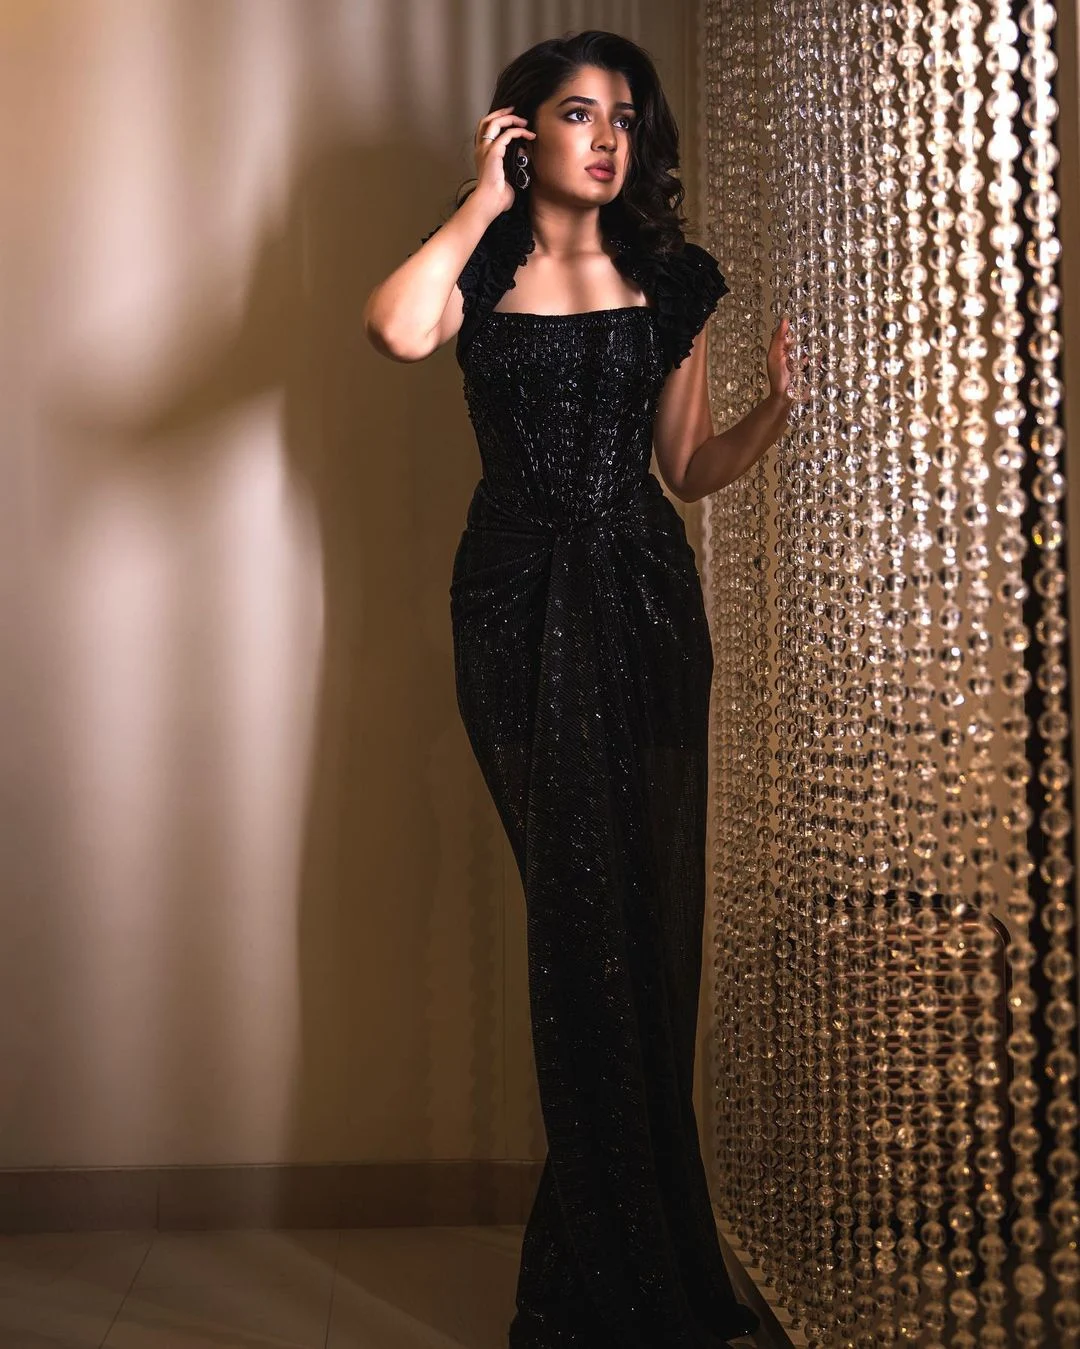 Actress Krithi Shetty Wearing this spectacular Black gown